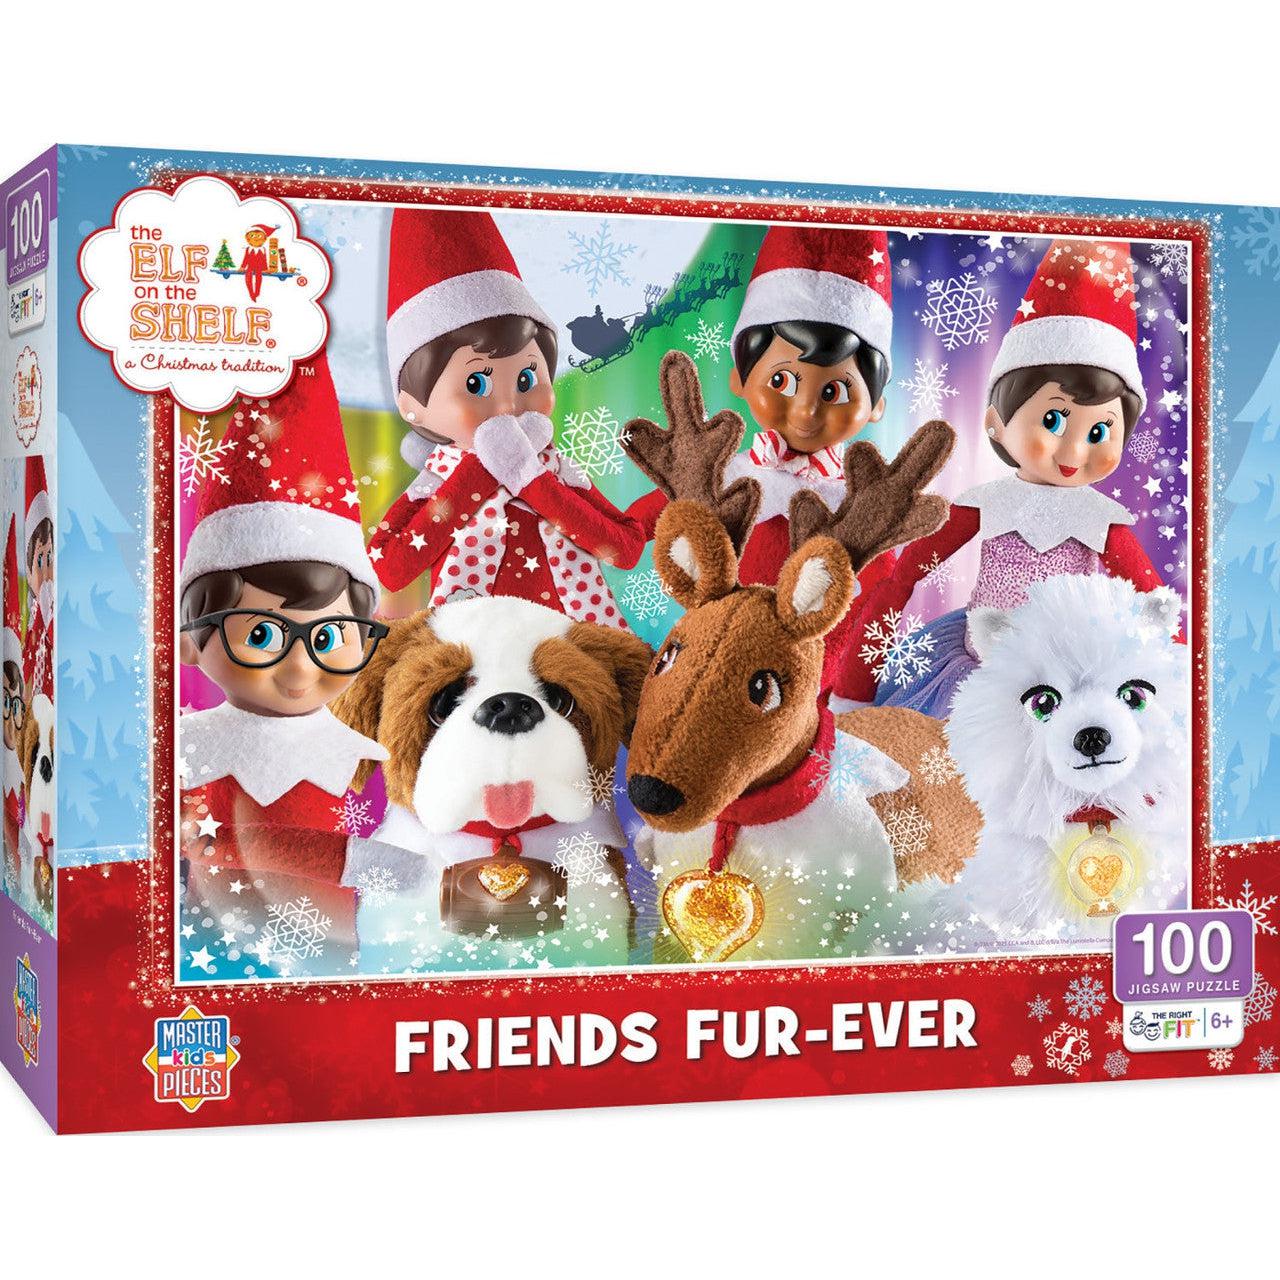 MasterPieces-Elf on the Shelf - Friends Fur-ever - 100 Piece Puzzle-12127-Legacy Toys